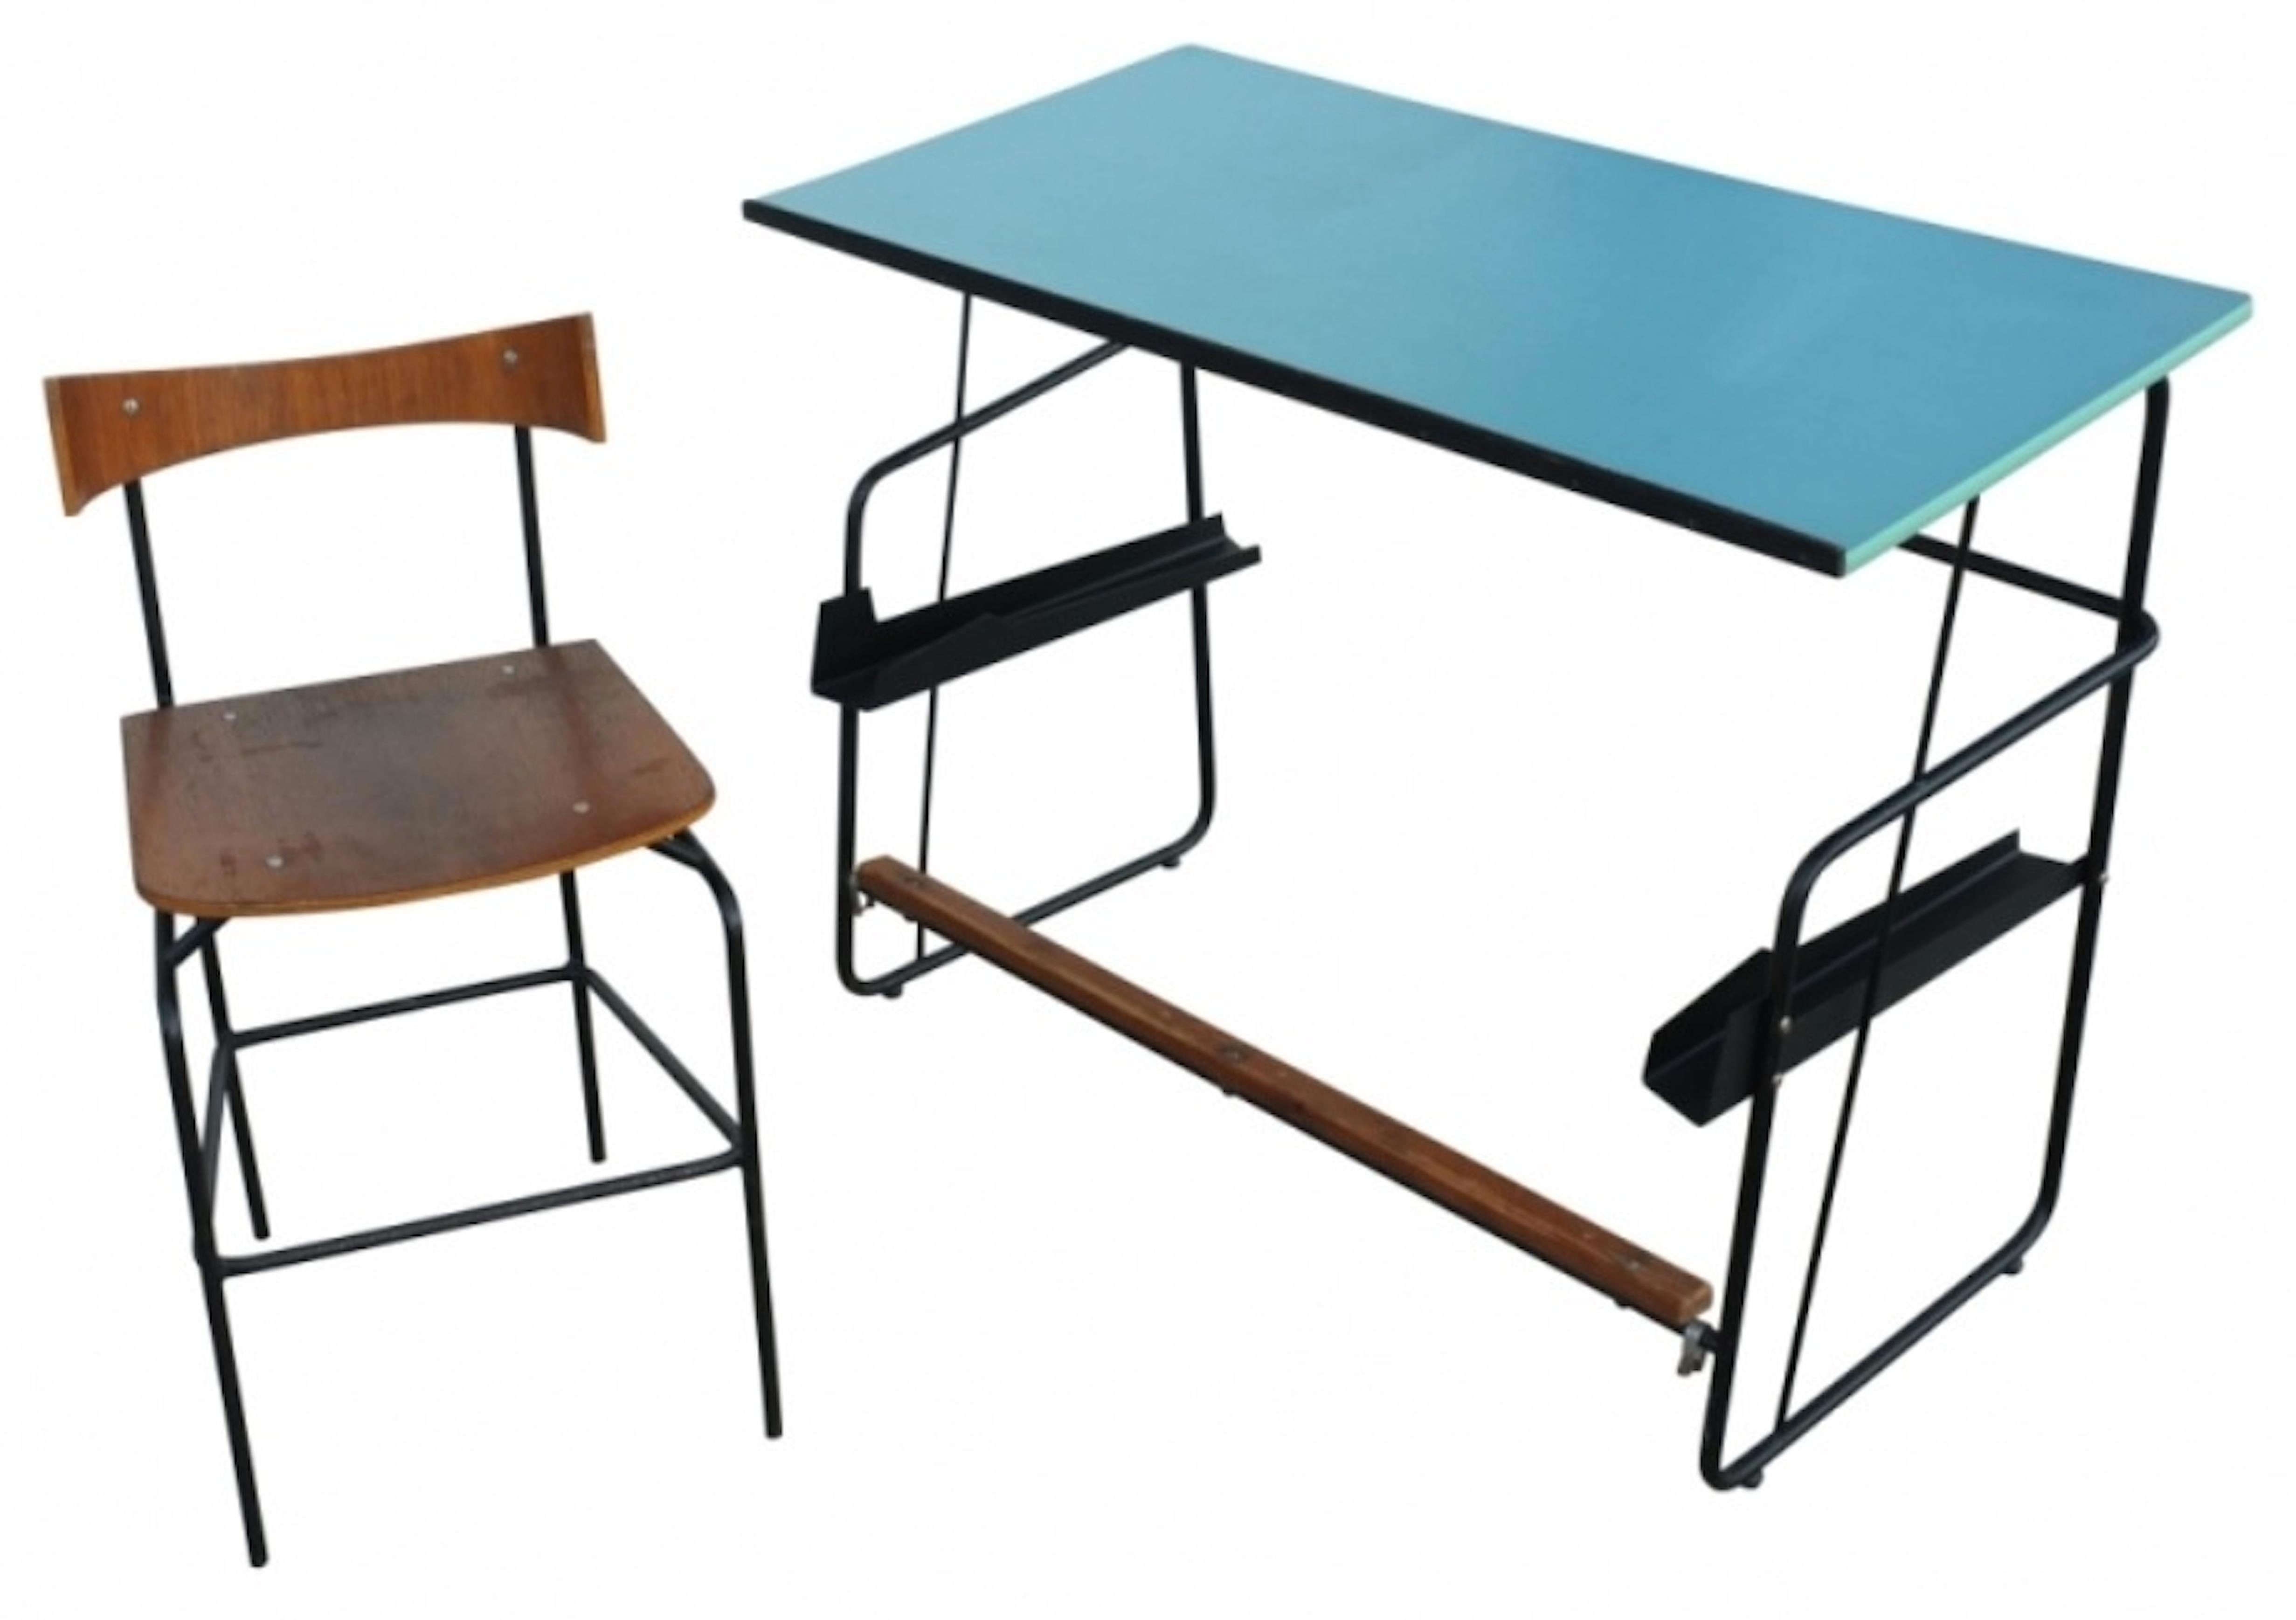 An architect desk made for the Vakgroup Architecture at Stedenboun, University of Gent. Designed by Jacques Seeuws for Swan Deinze,1959.
Desk and chair made of painted black metal structure with bleu fornica tabletop. A collection piece. Excellent